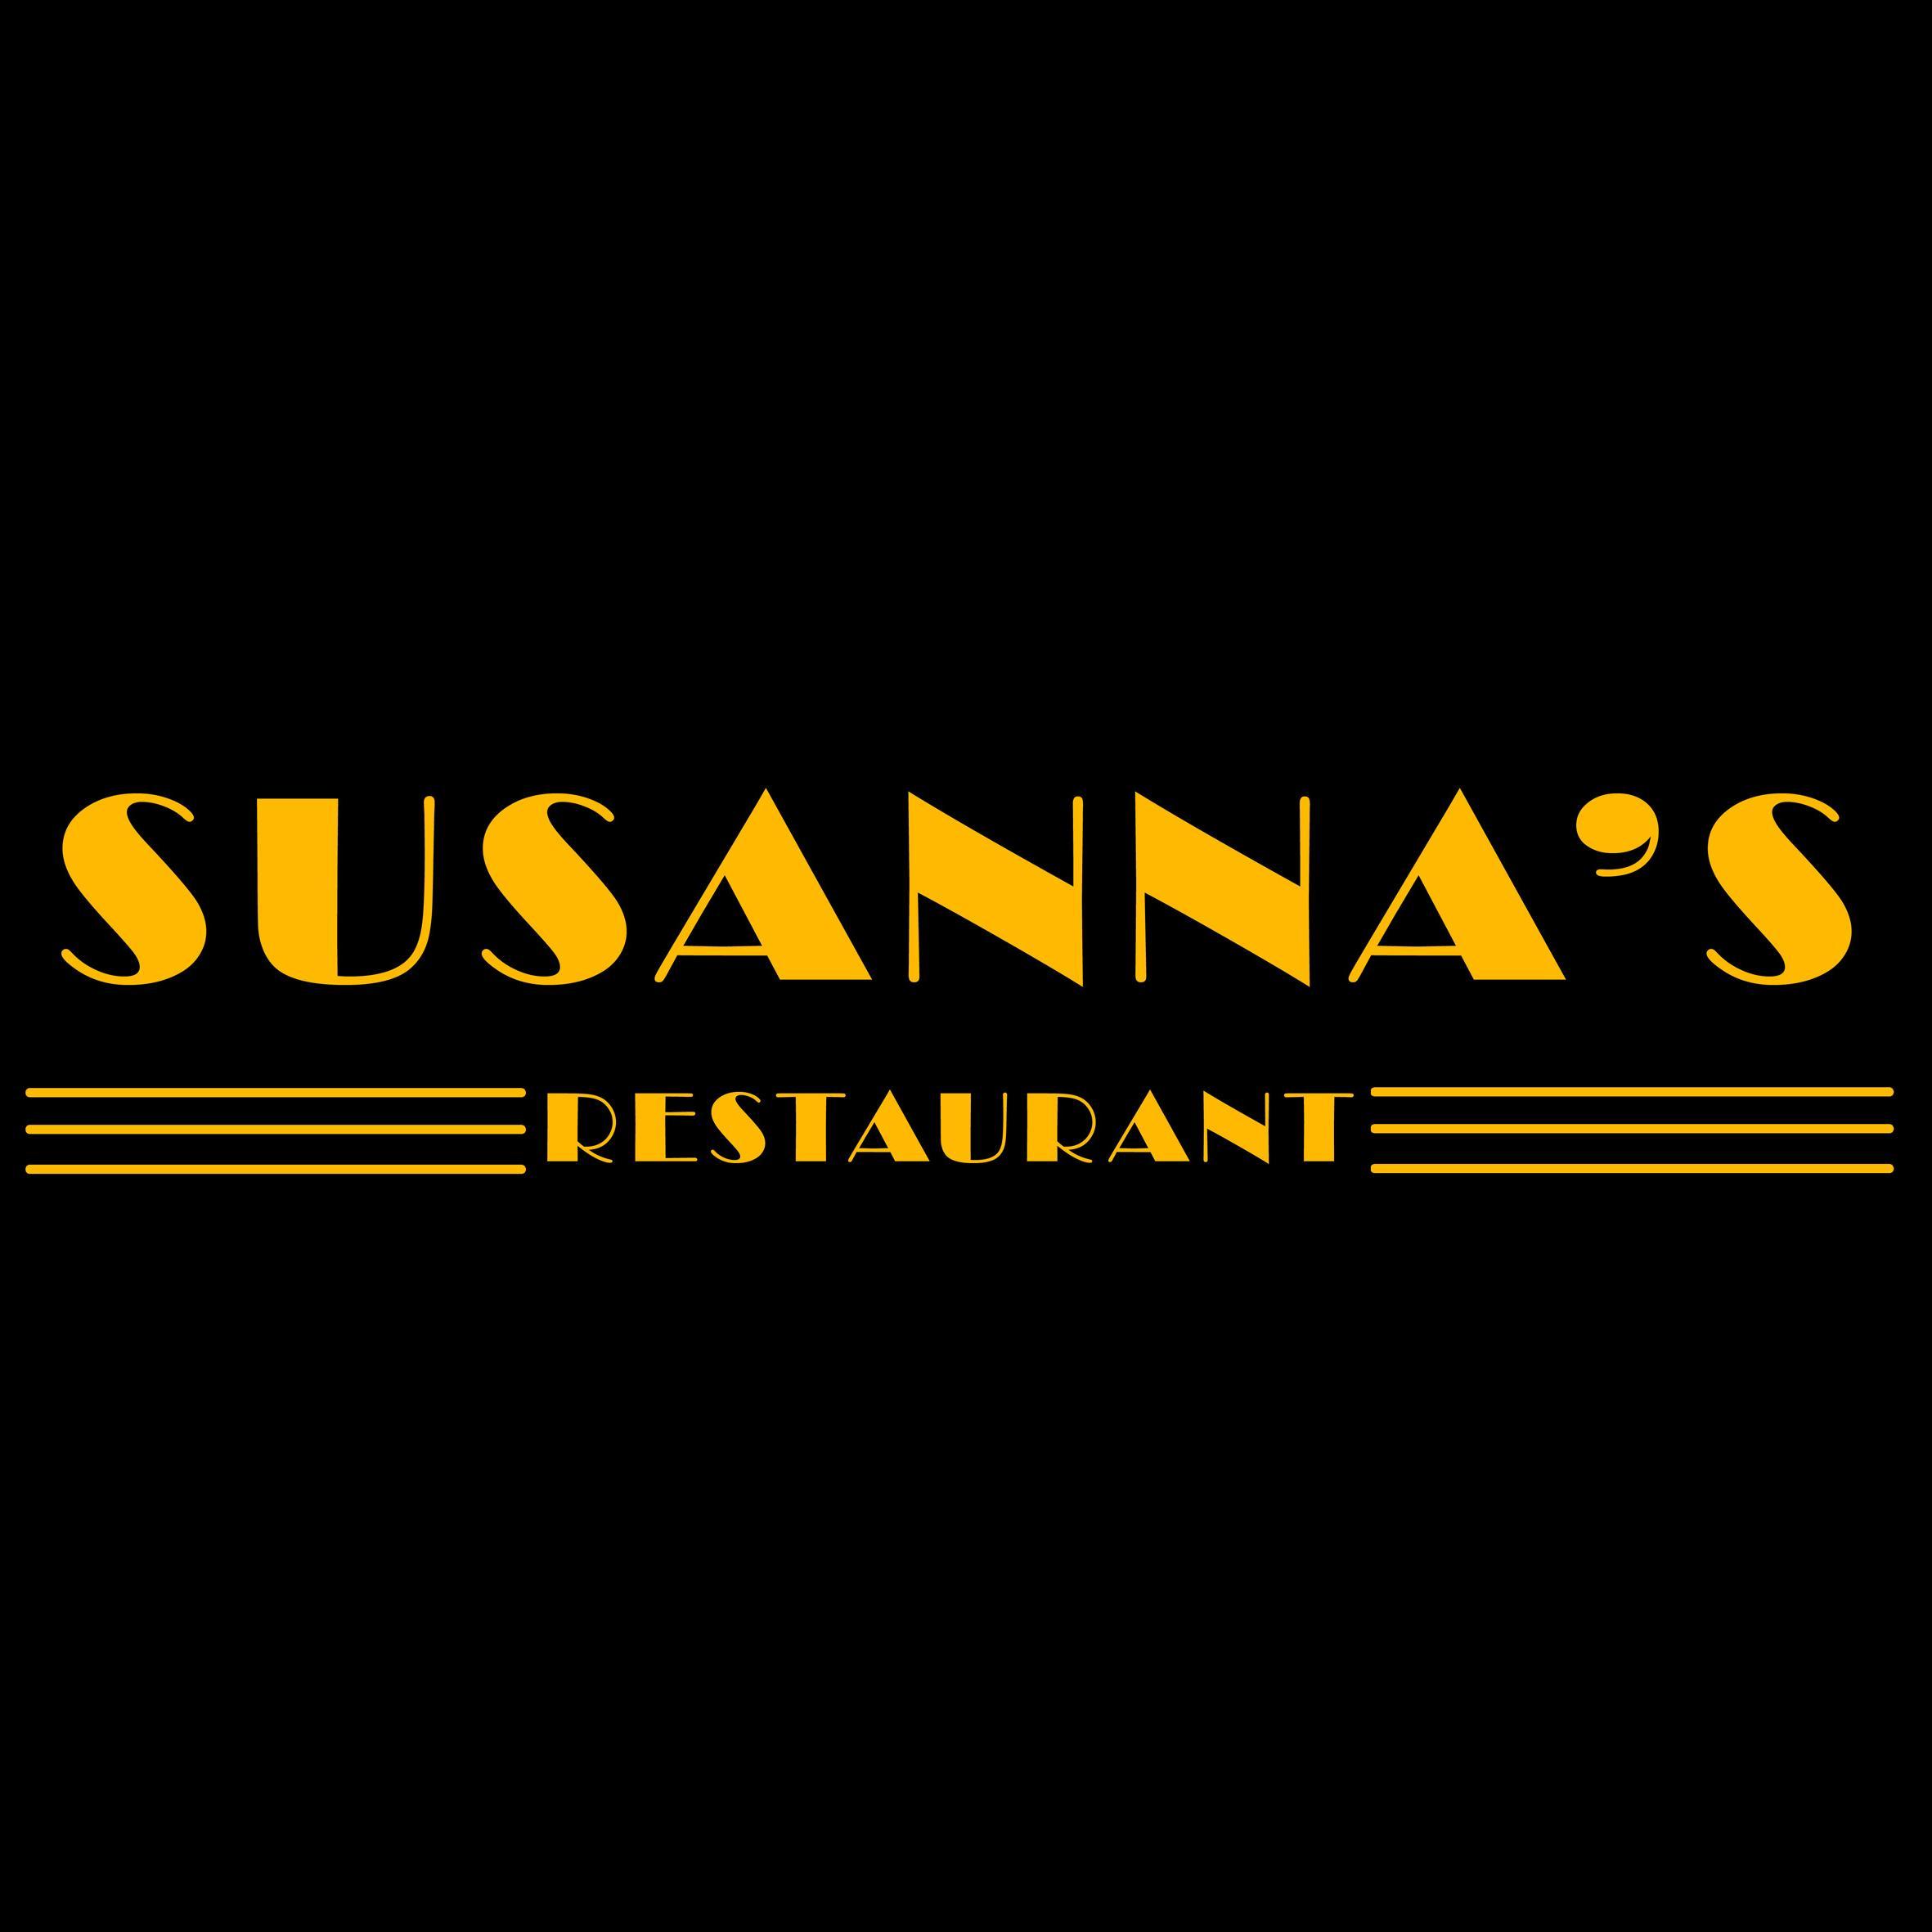 At Susanna’s Restaurant we bring the Nordic / Scandinavian cuisine to Phuket. Serving hearty well-portion meals which will leave you satisfied.